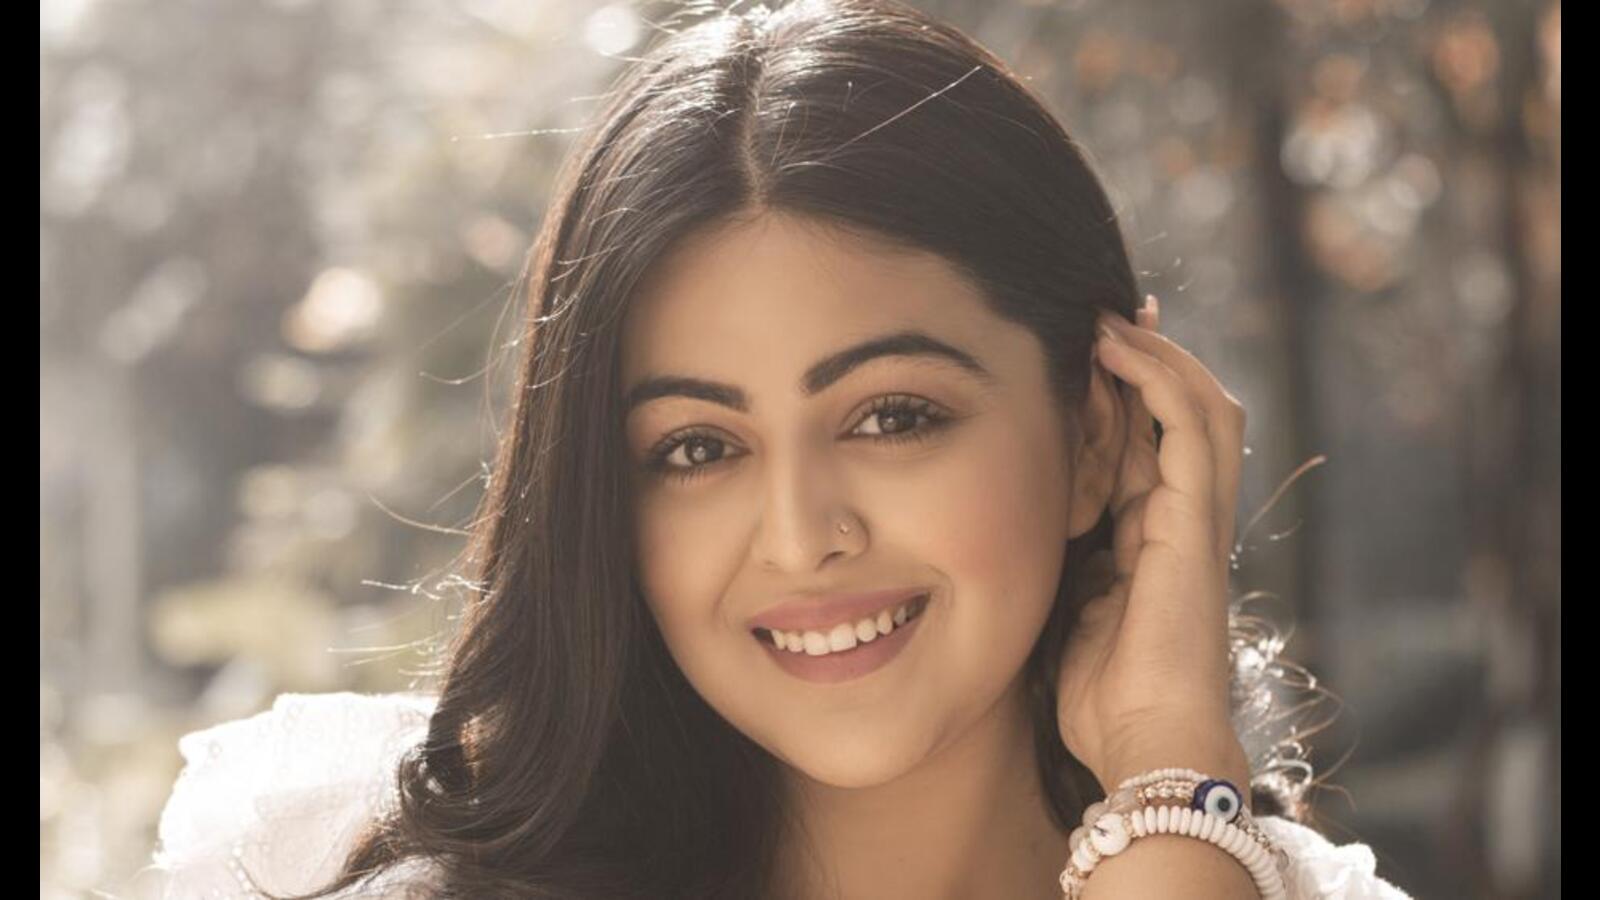 A producer told me I couldn't act: Shafaq Naaz - Hindustan Times